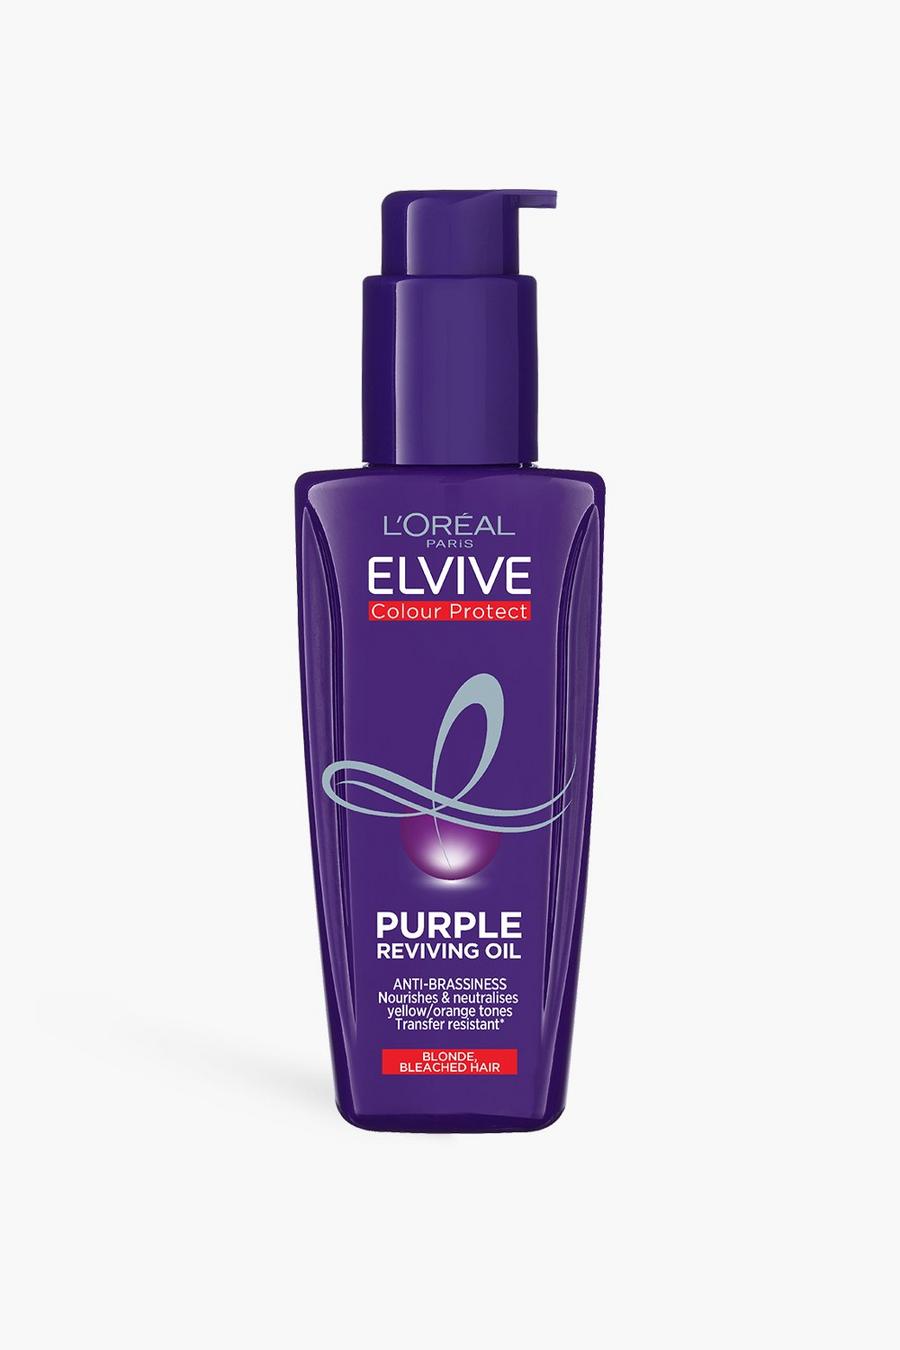 L'Oréal Elvive Colour Protect Purple Anti-Brassiness Hair Oil for Highlighted Brunette 100ml